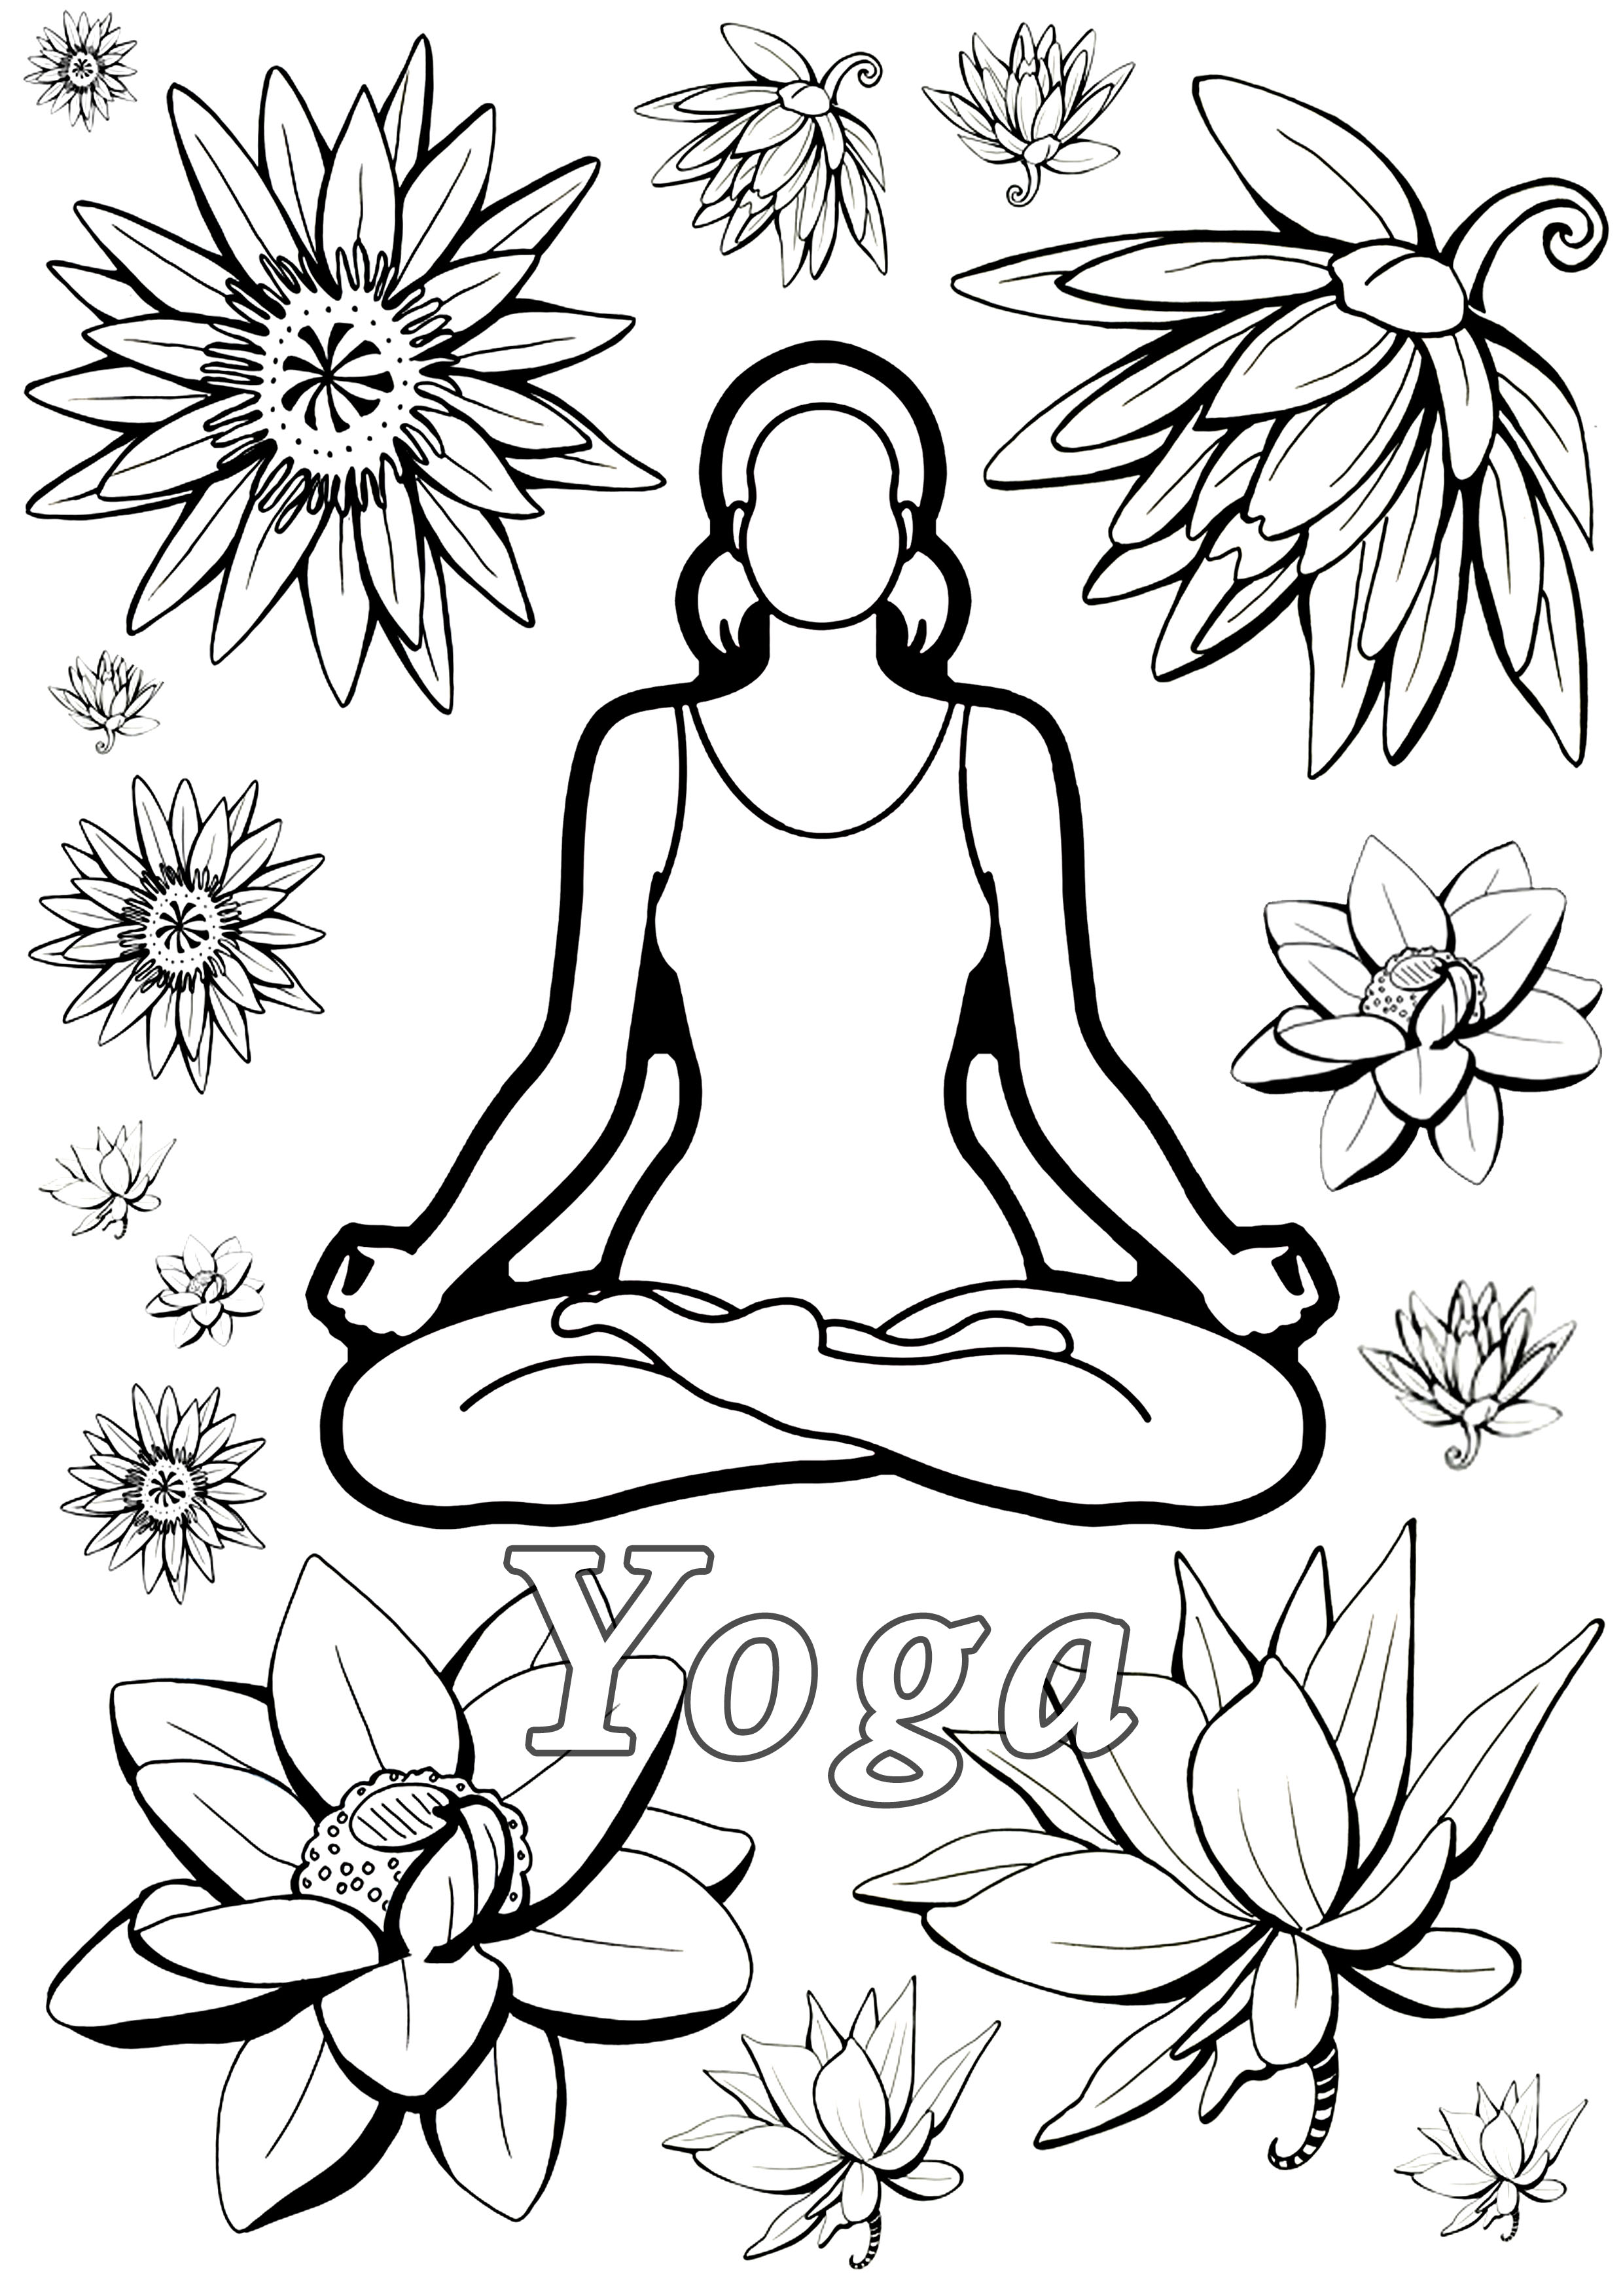 Coloring page inspired by Yoga : woman meditating and Lotus Flowers